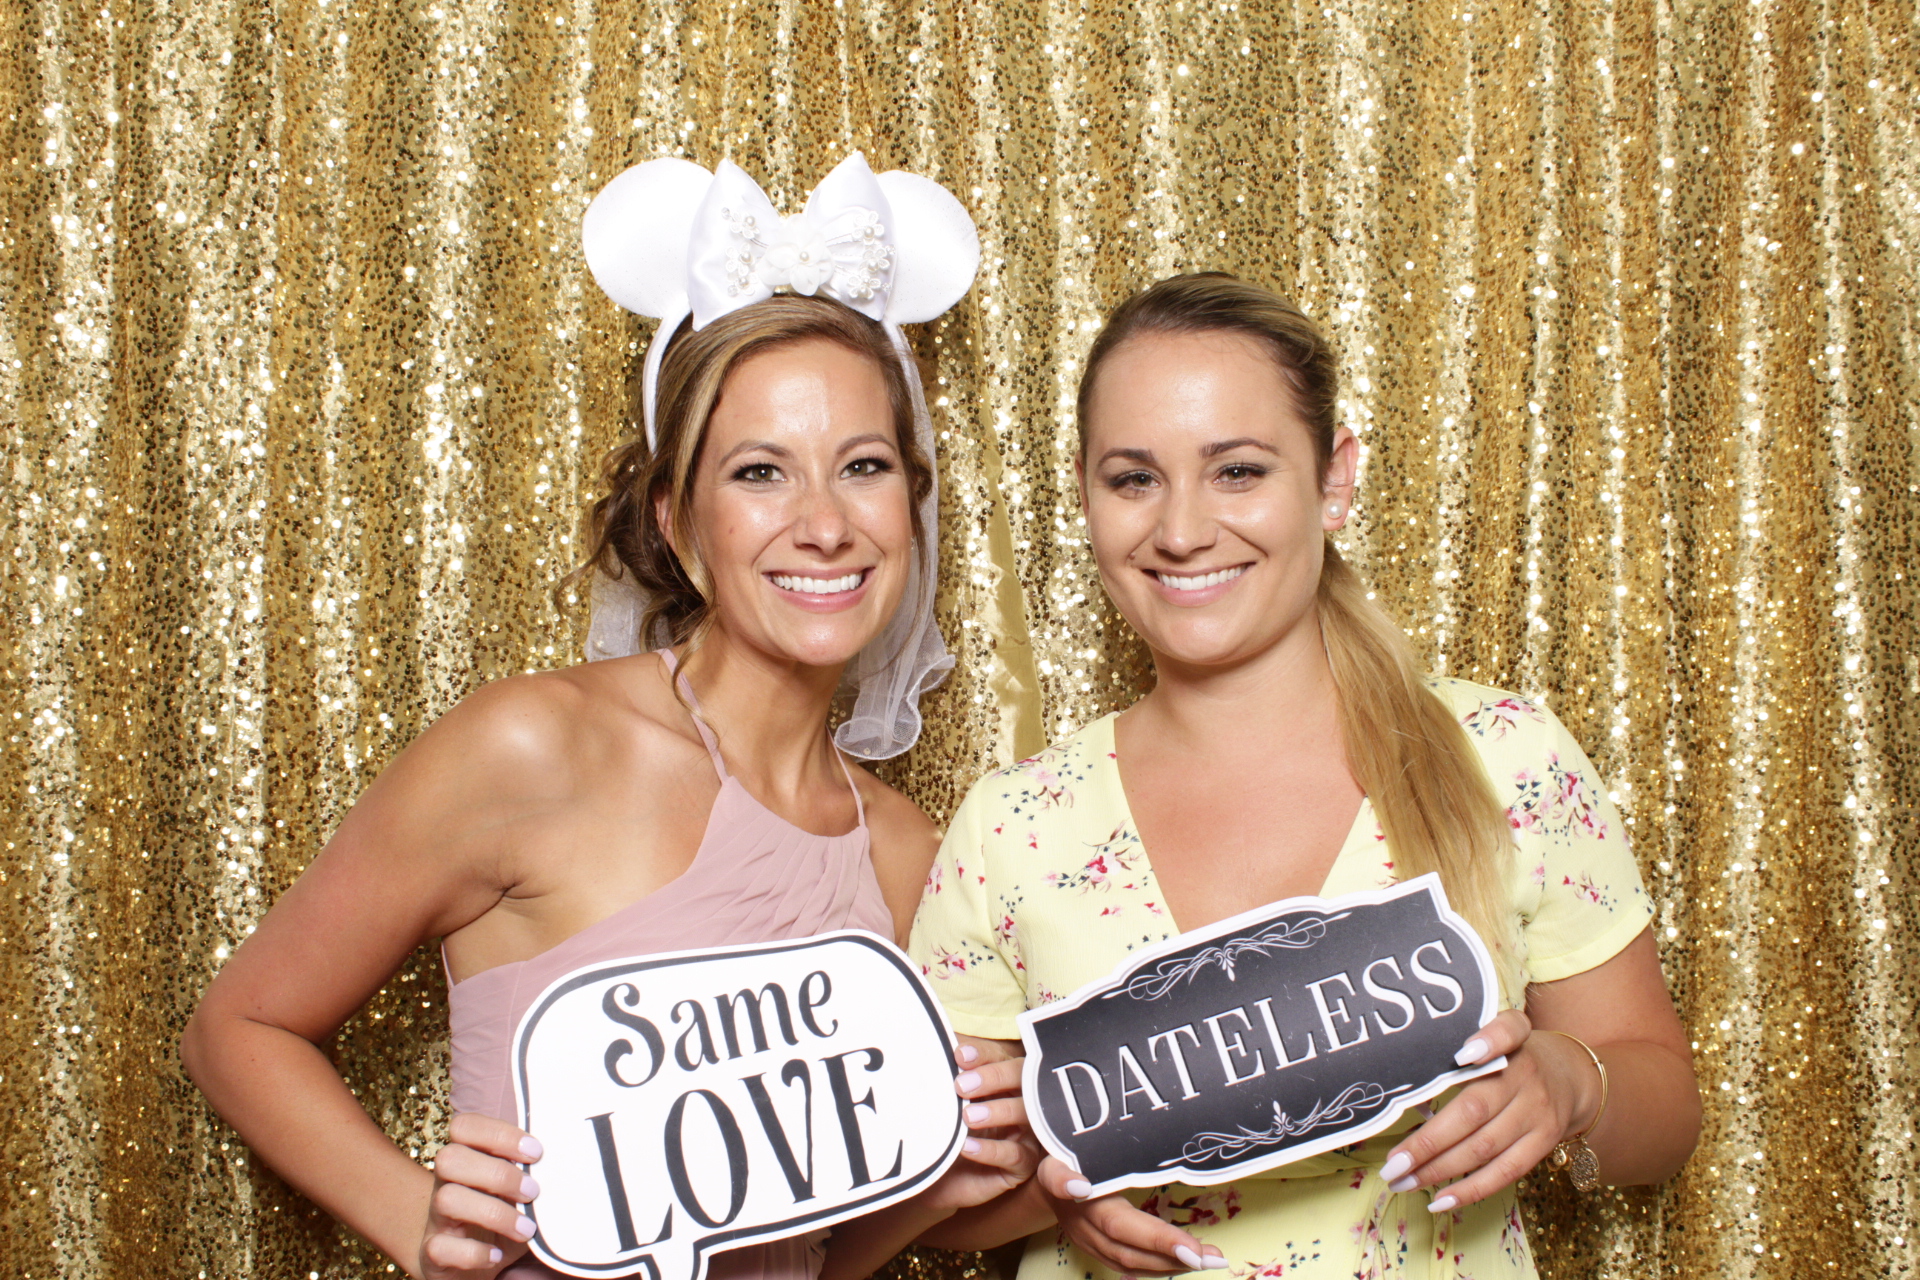 Highlands Ranch Mansion Photo Booth